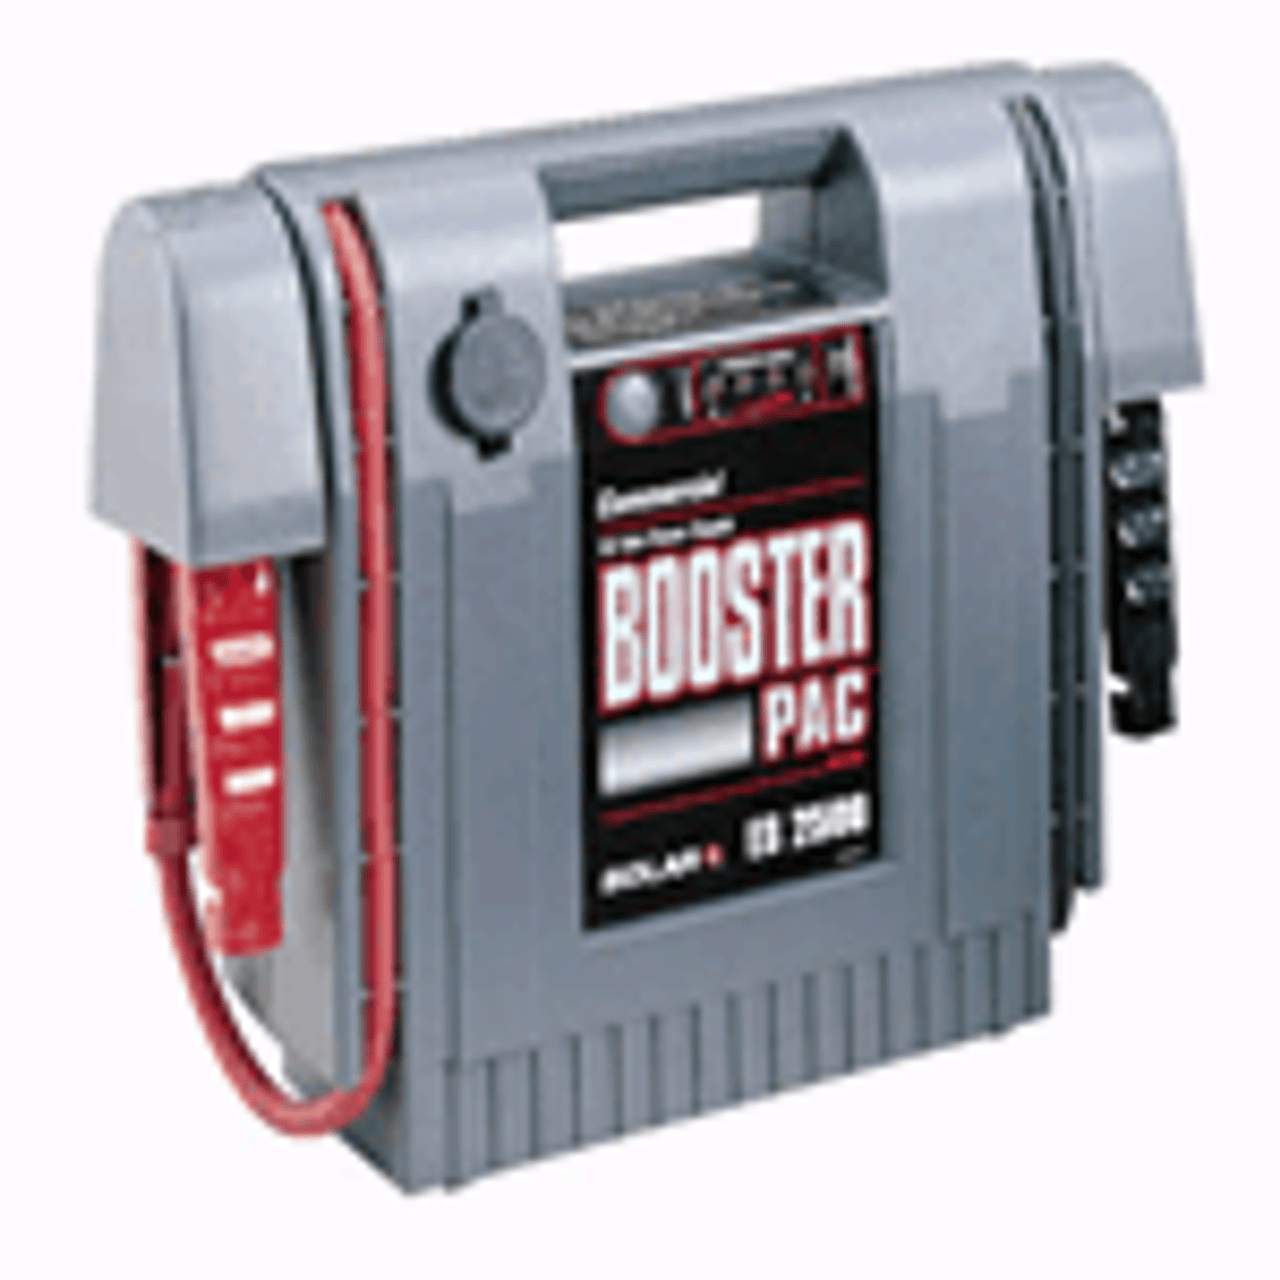 Booster PAC Rechargeable Battery Booster & DC Power Source, 12V 360 Crank  Amp 12V 1500 Peak Amp - SOLES5000 - Penn Tool Co., Inc